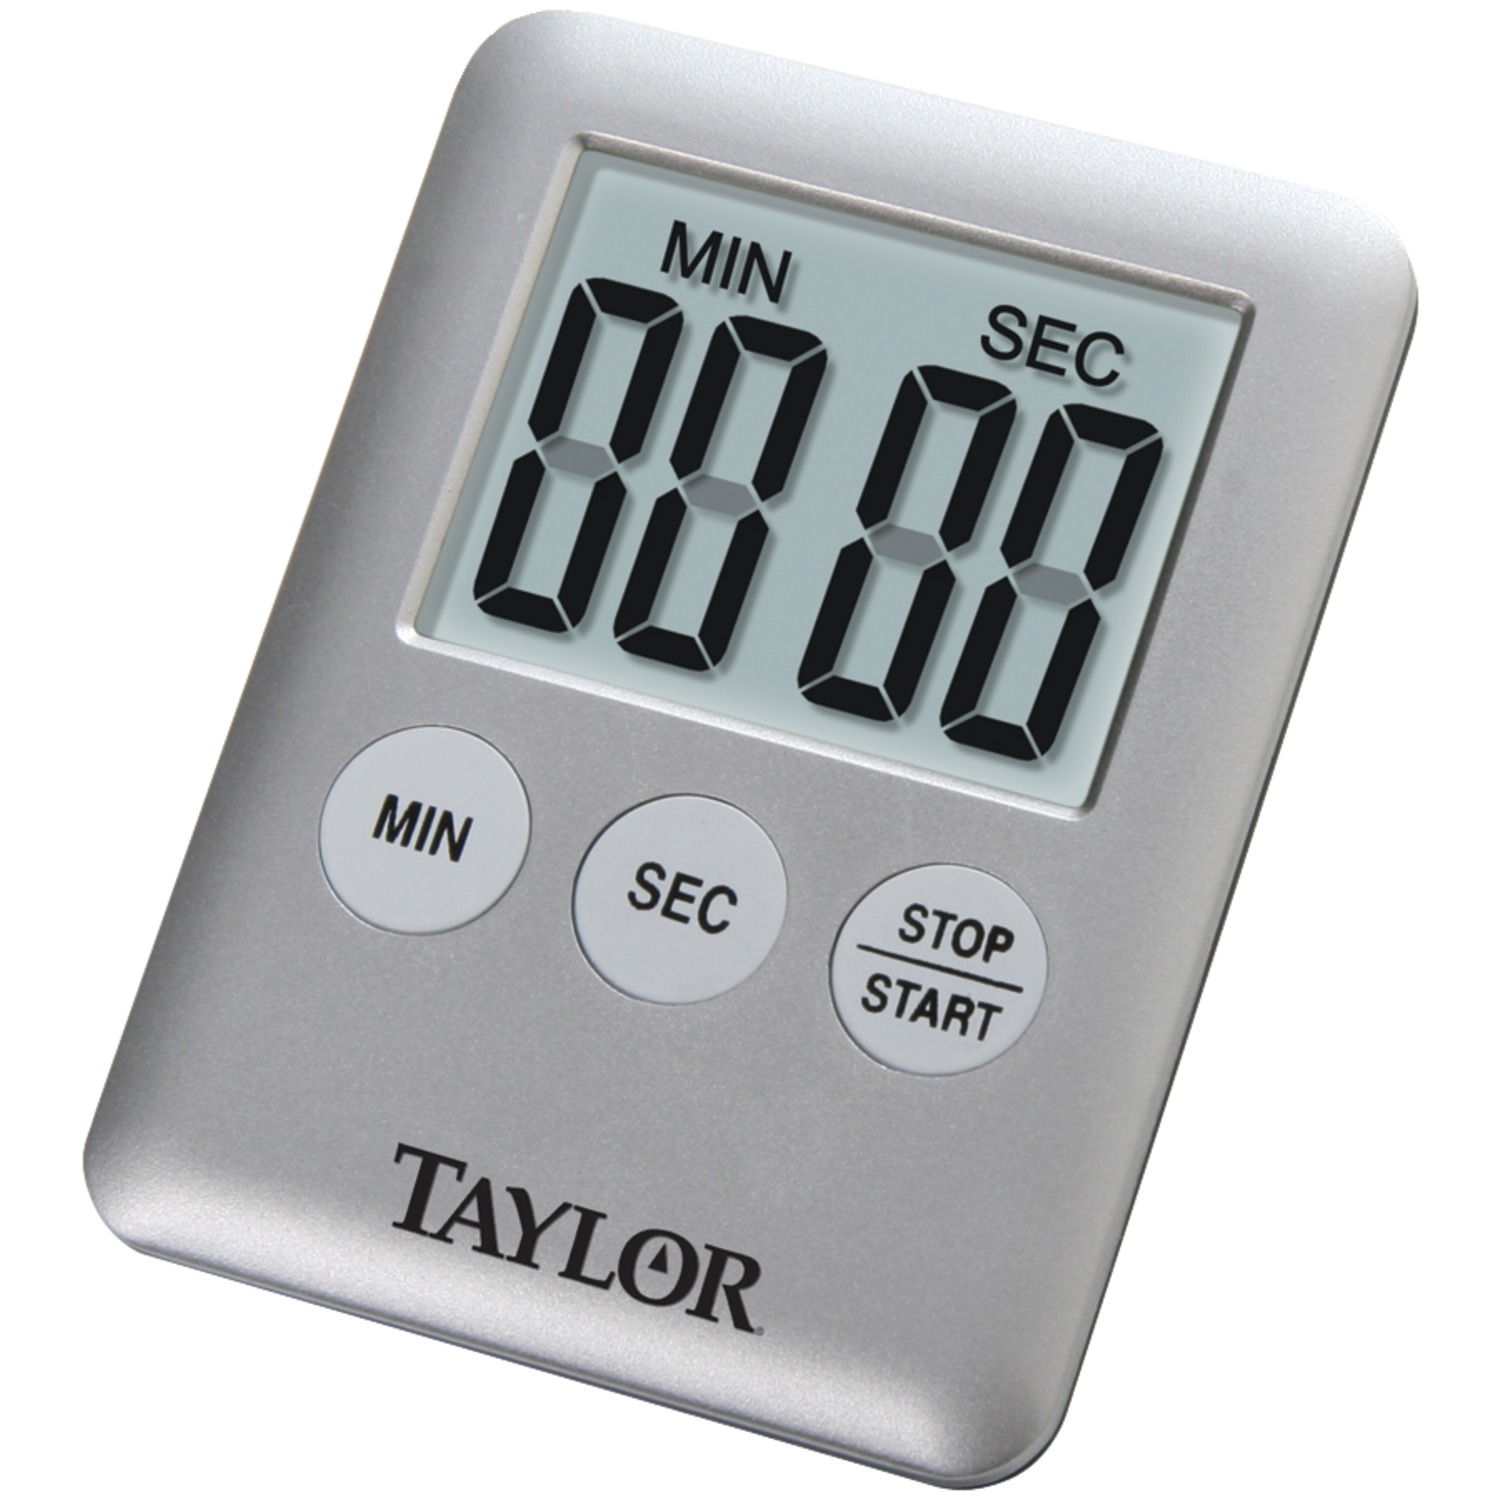 Taylor Precision Products Mini Digital Timer - image 1 of 2